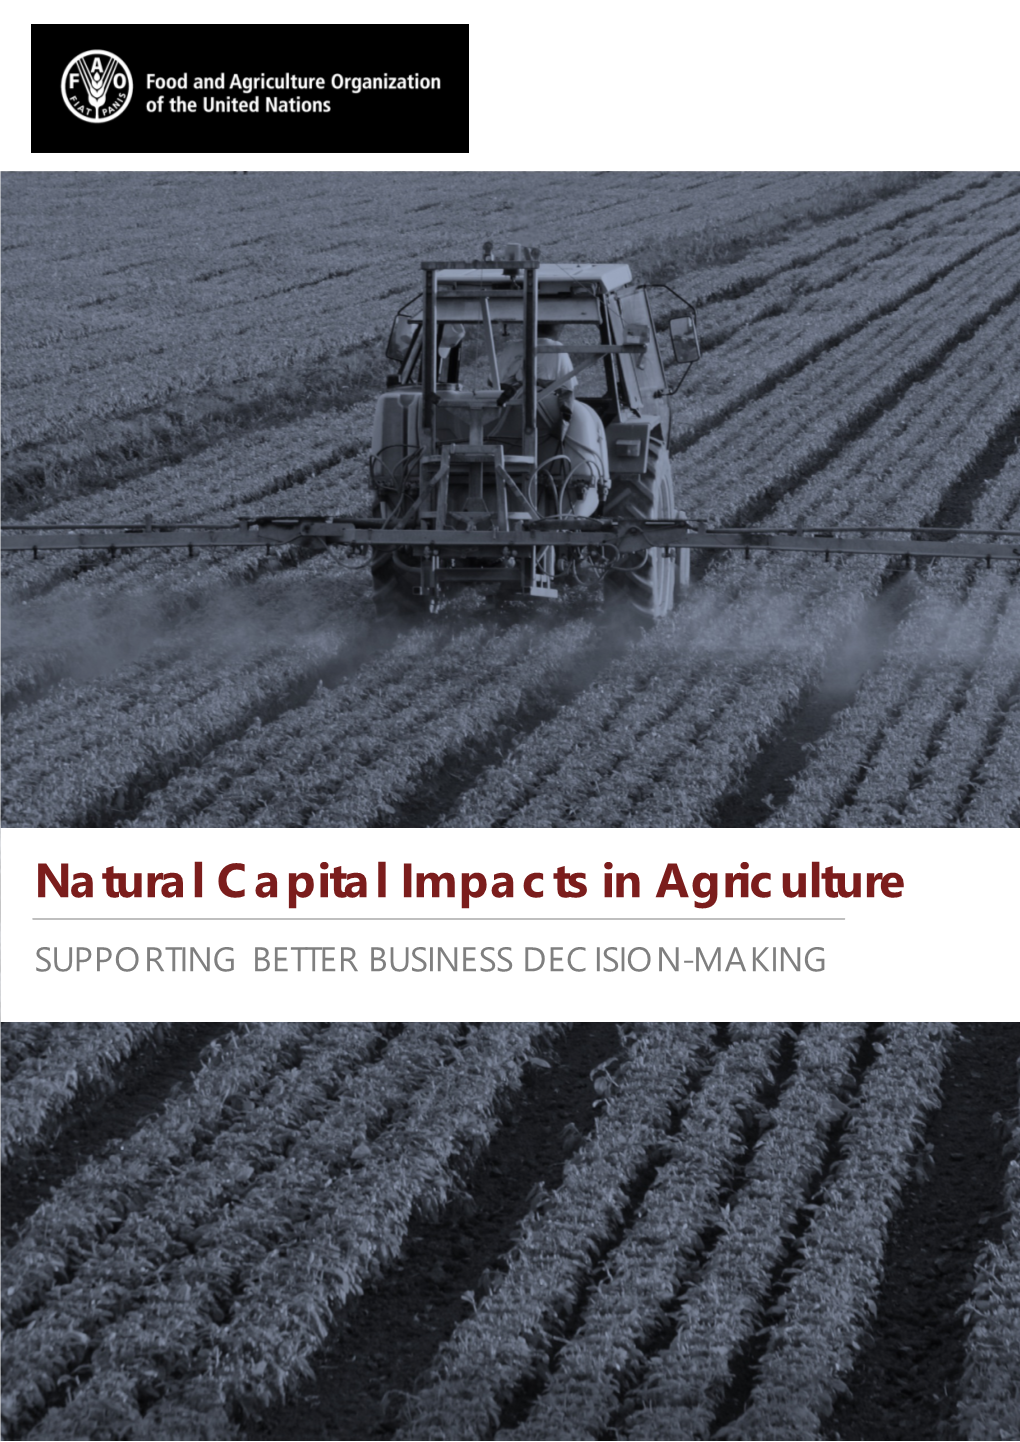 Natural Capital Impacts in Agriculture